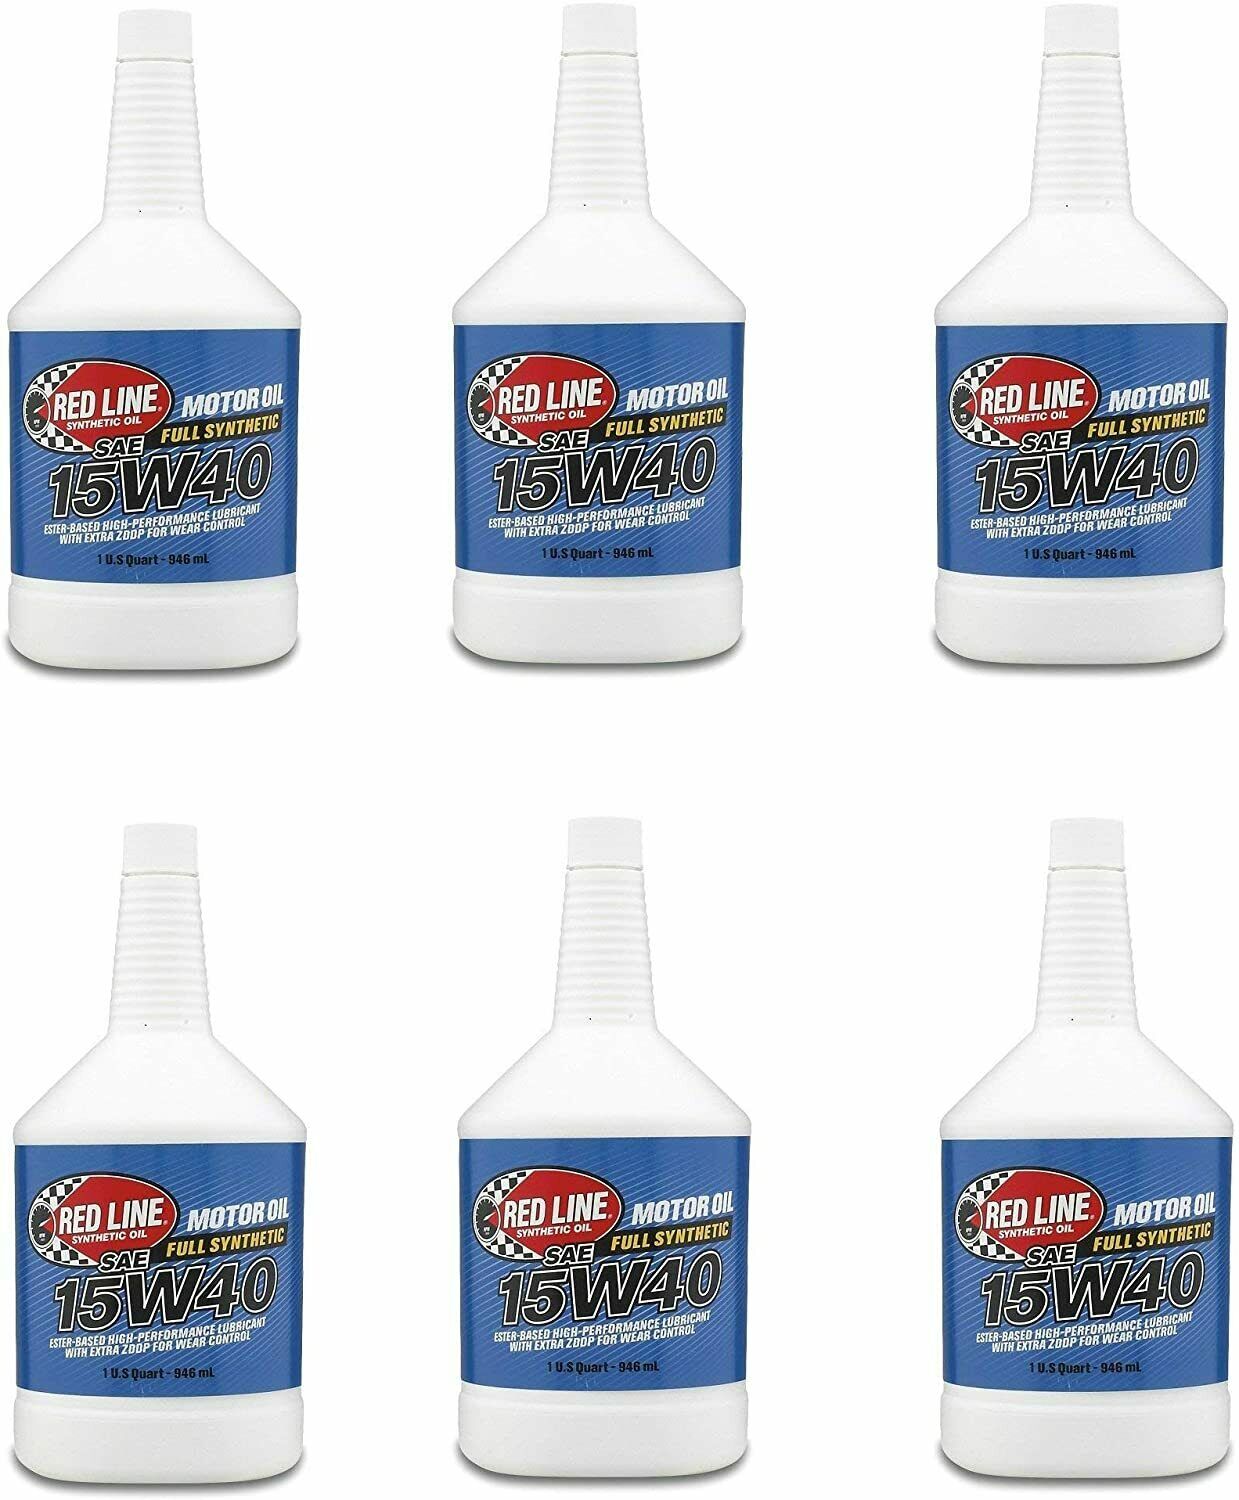 Red line oil 15w40 diesel 6-PACK SIX QUARTS full synthetic (21404) Made in USA